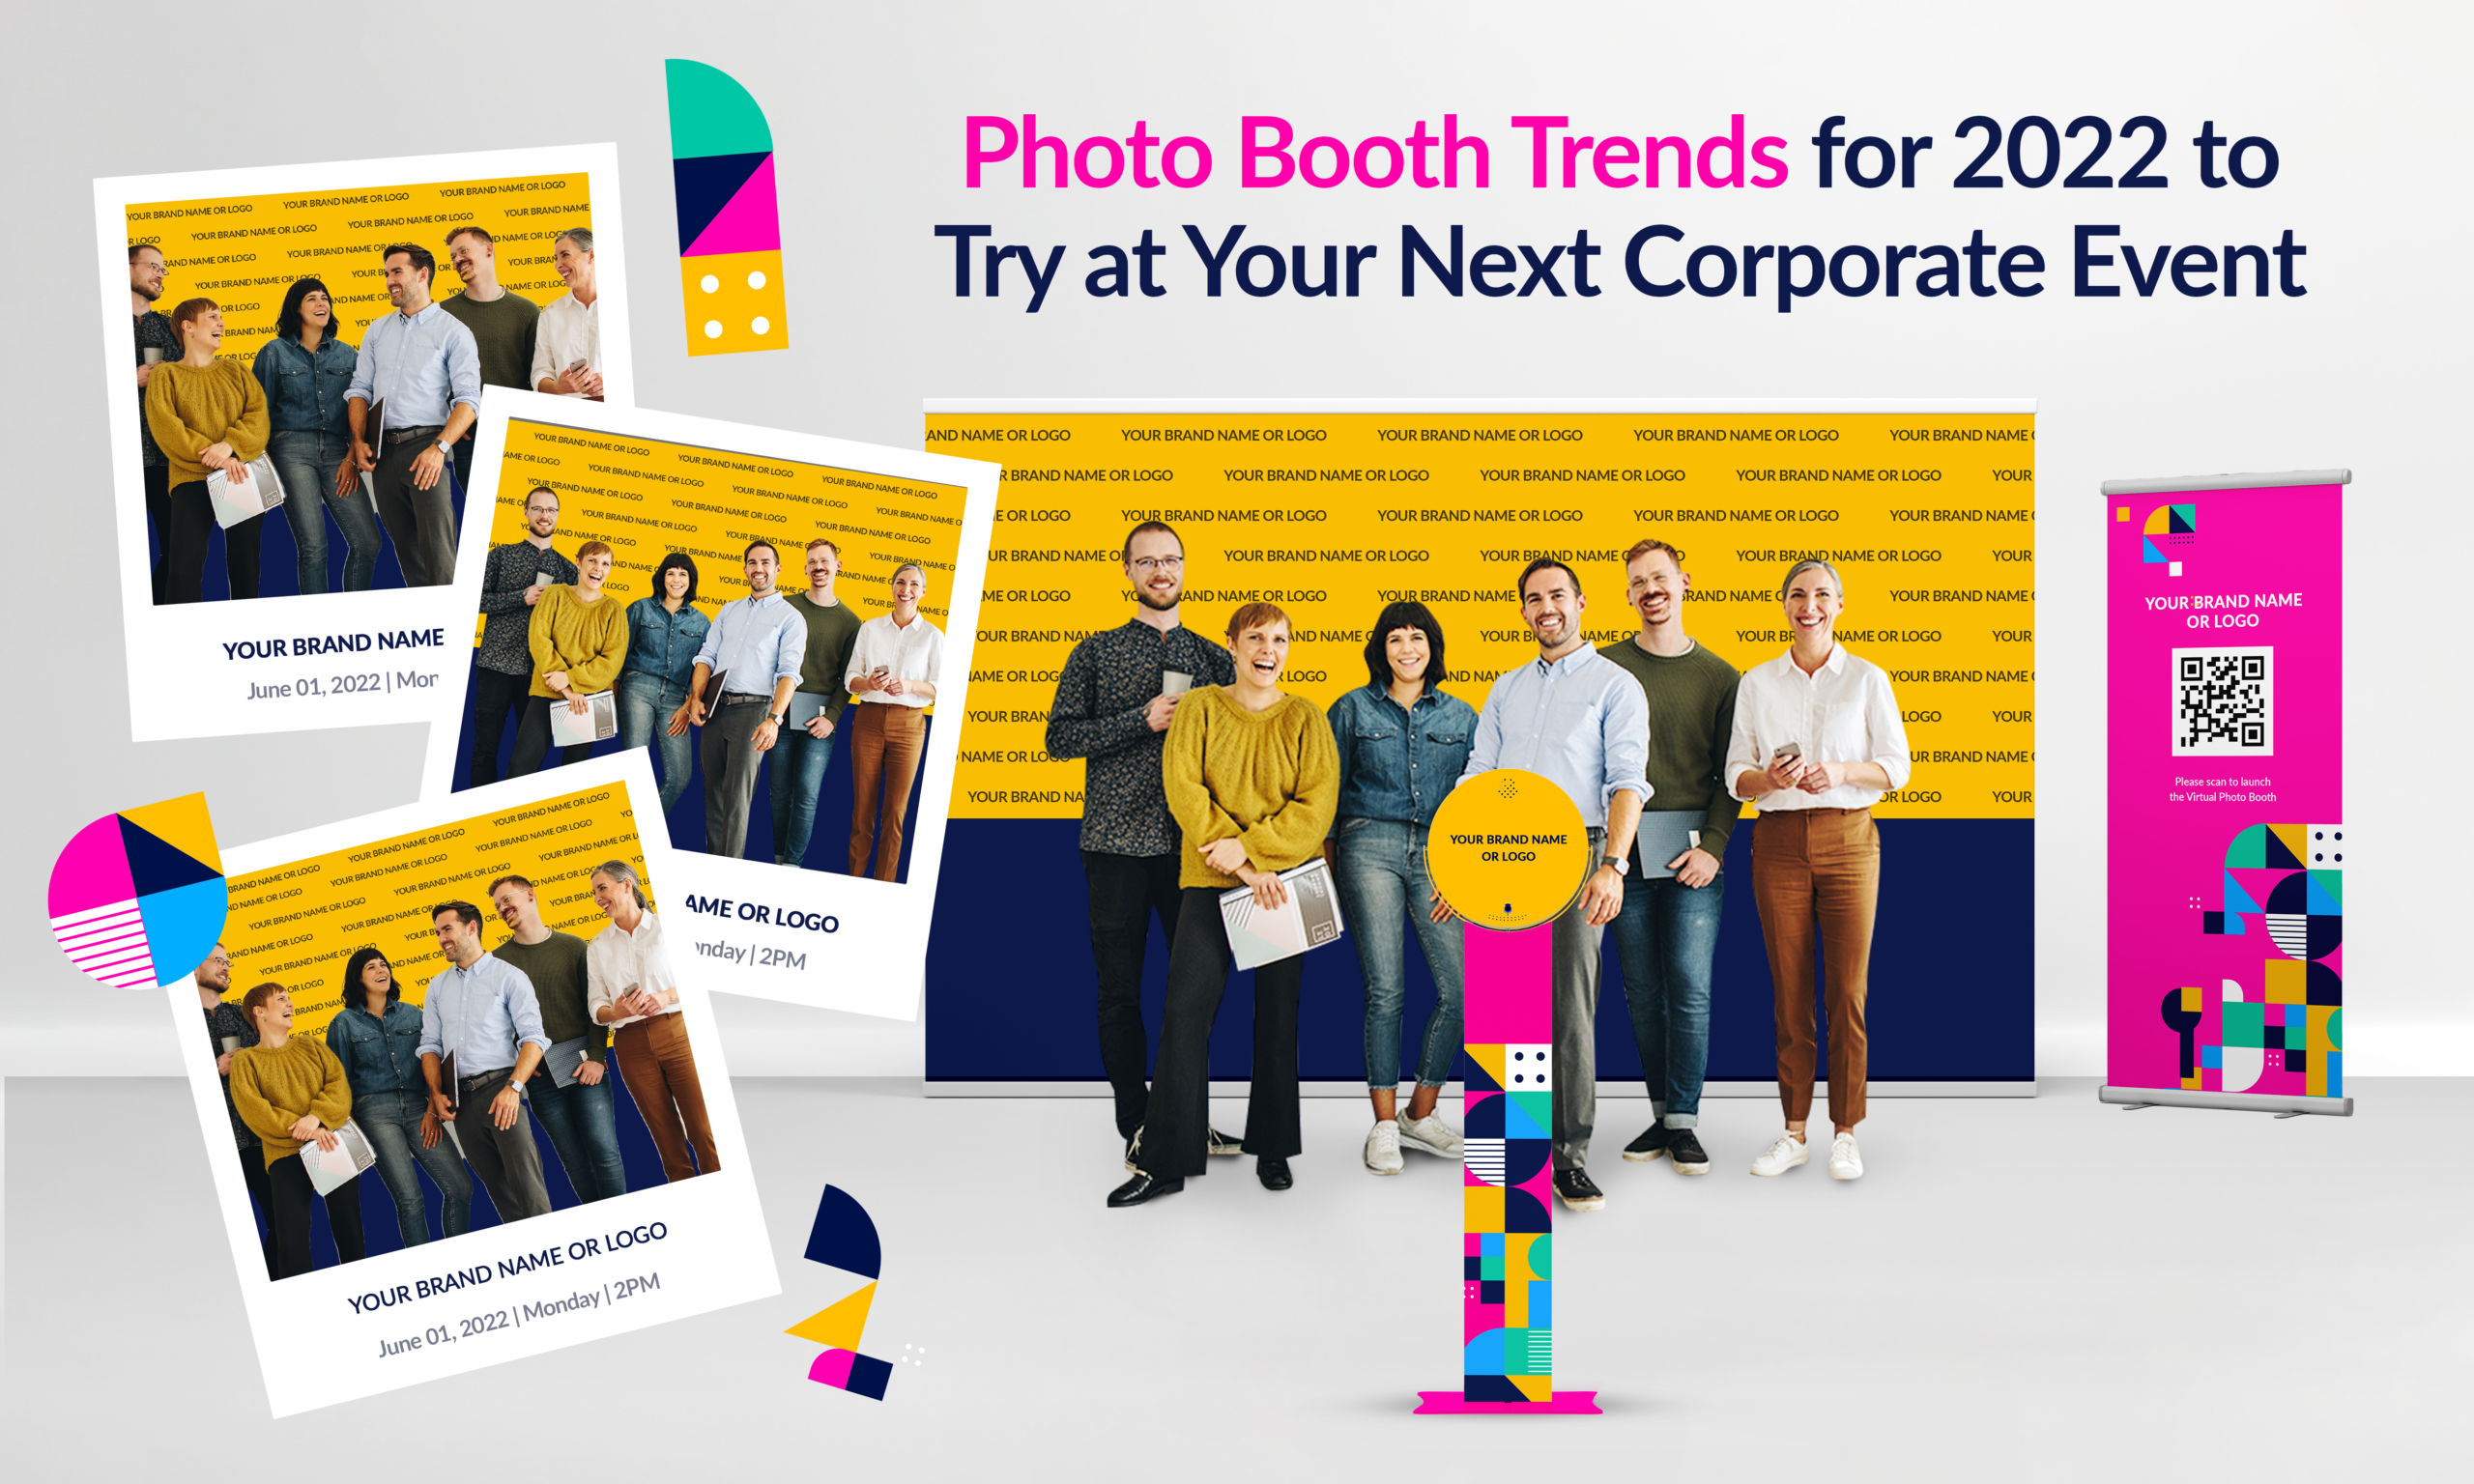 Corporate event photo booth rental trends for 2022